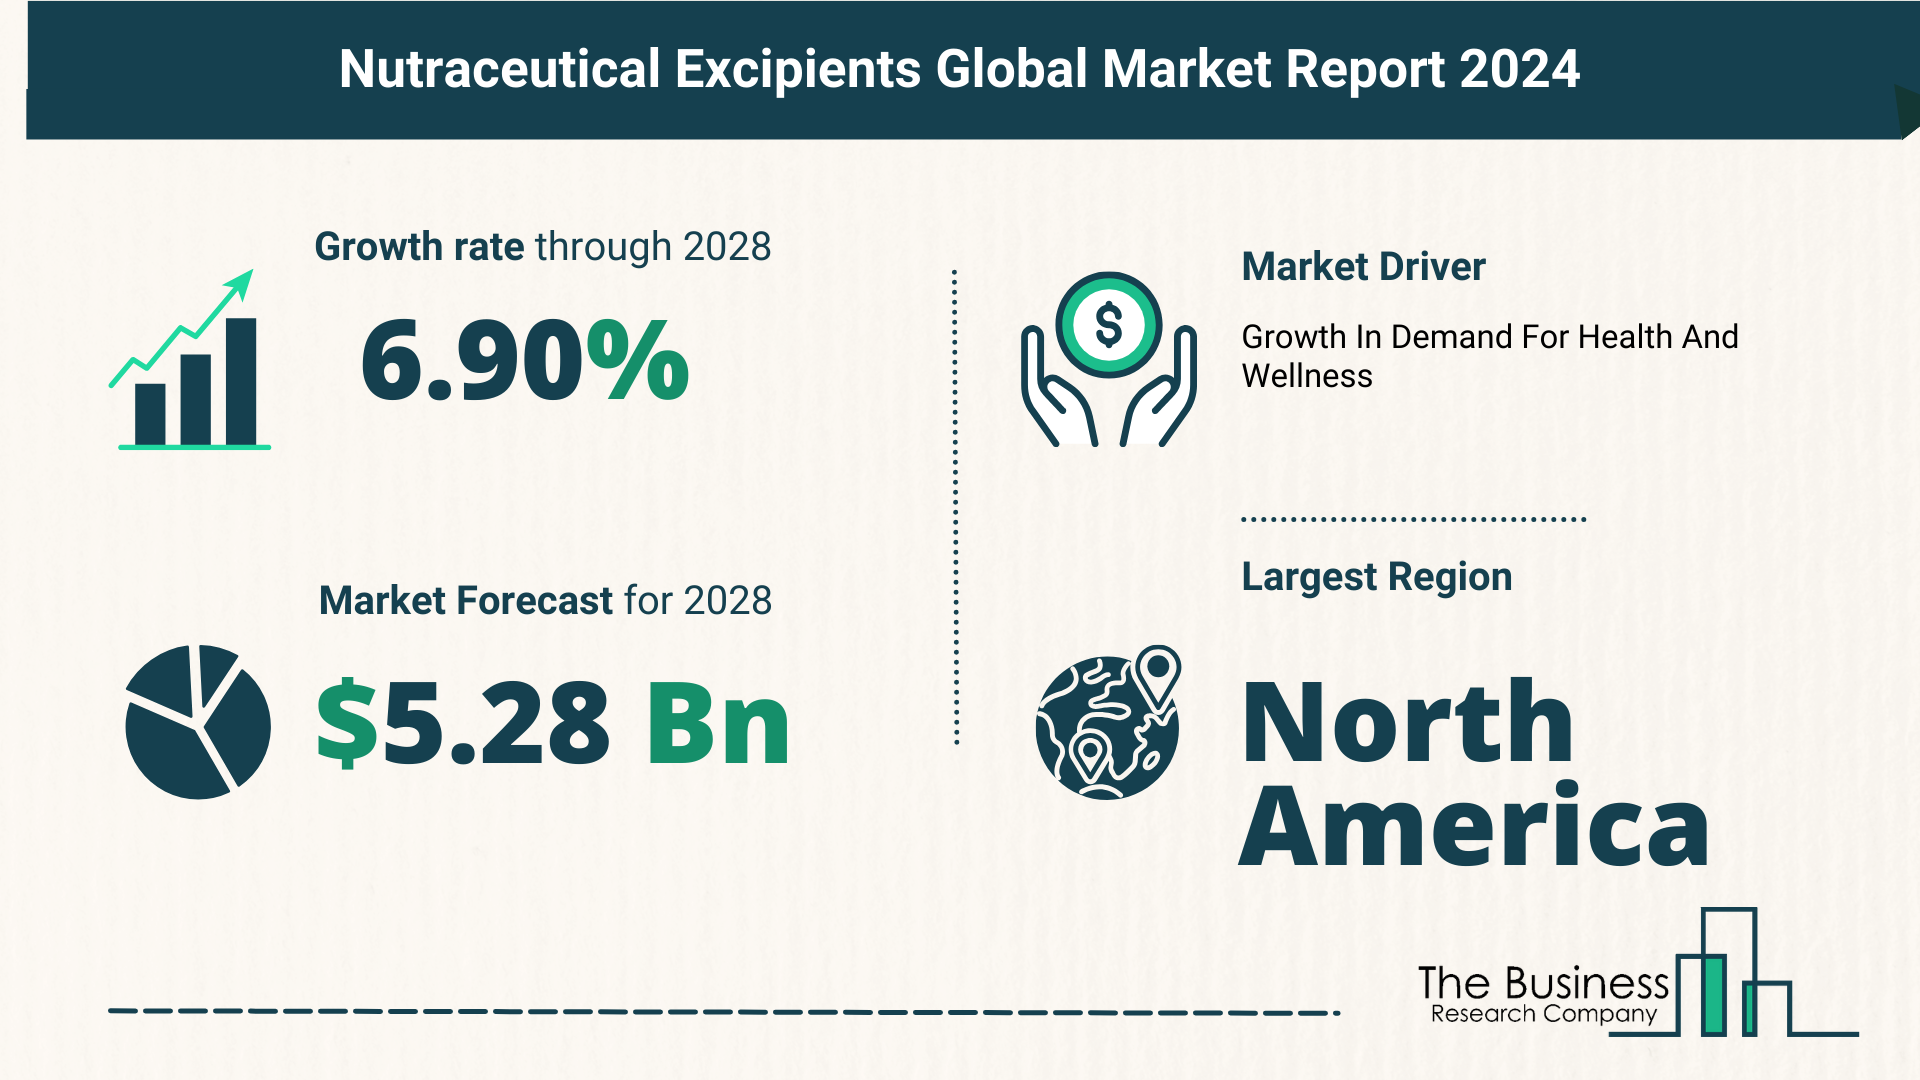 Global Nutraceutical Excipients Market Overview 2024: Size, Drivers, And Trends